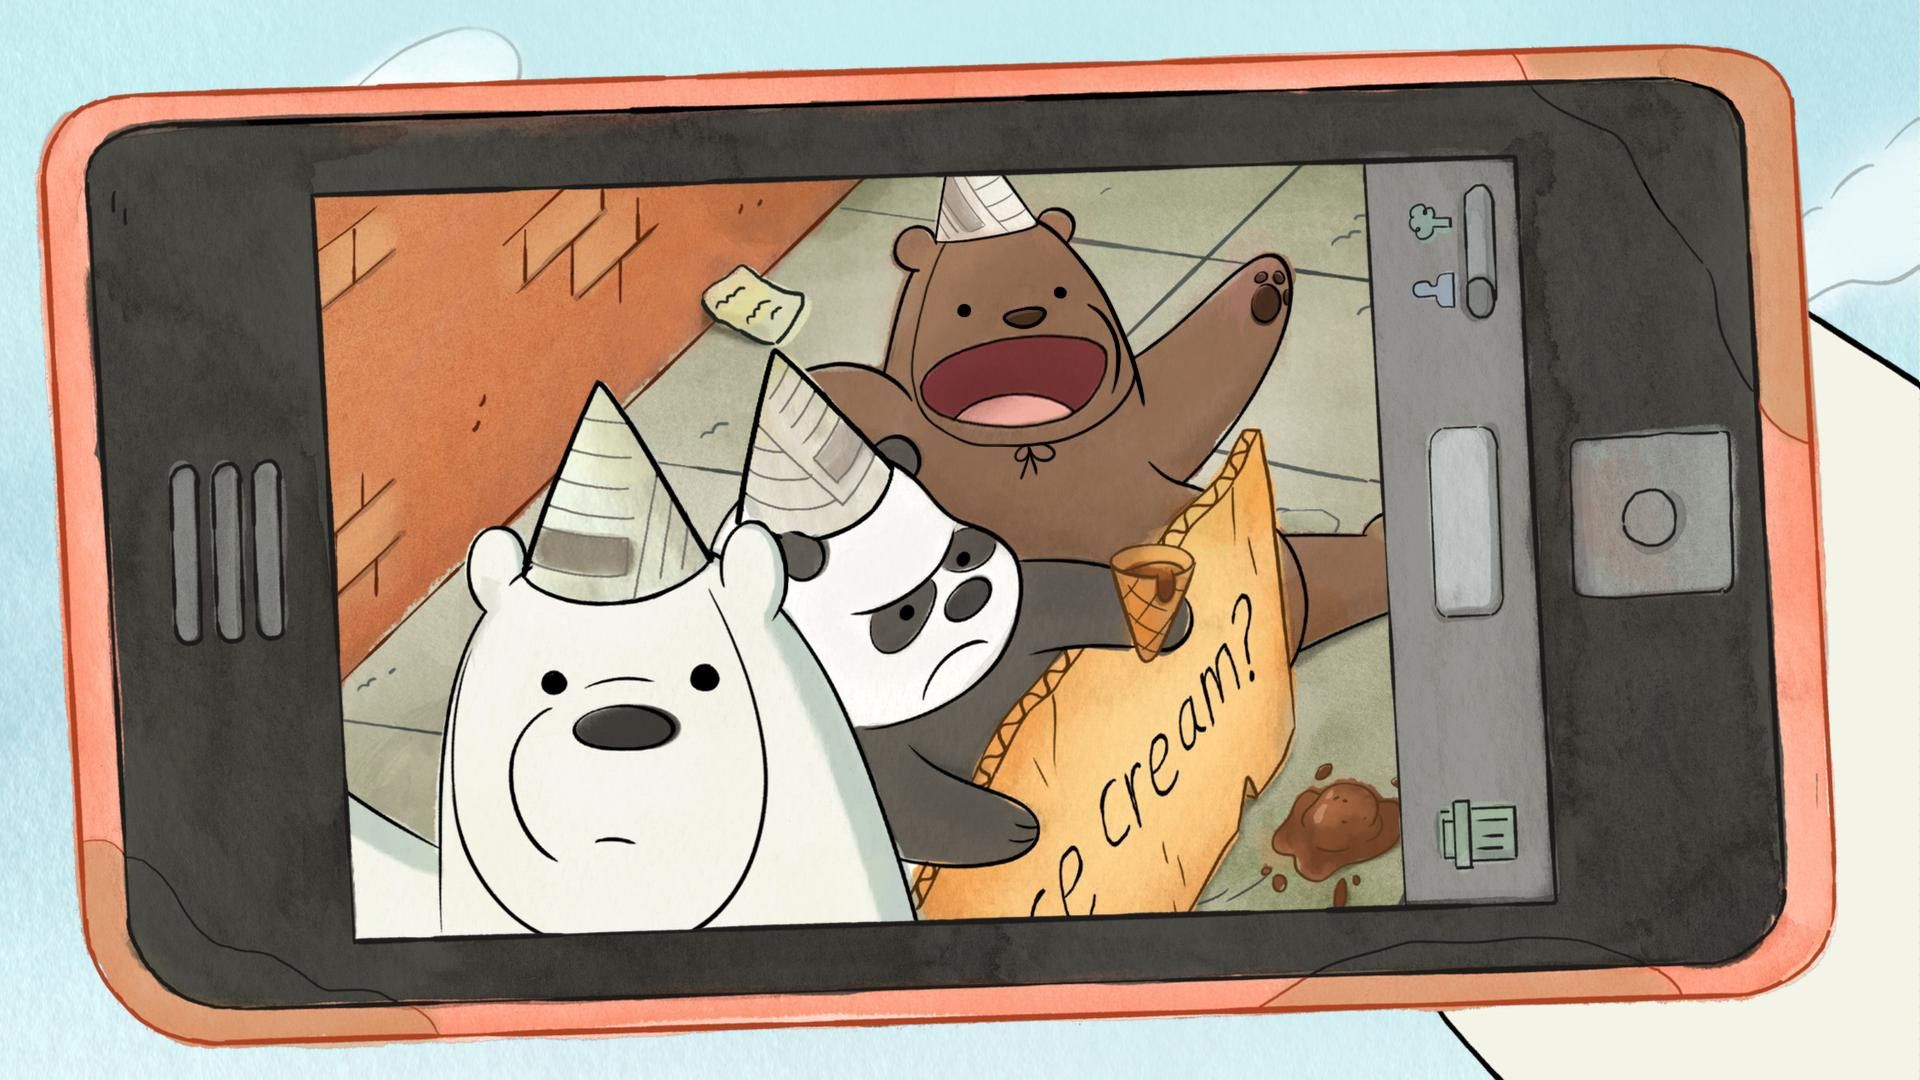 A person holding up an electronic device with bears on it - We Bare Bears